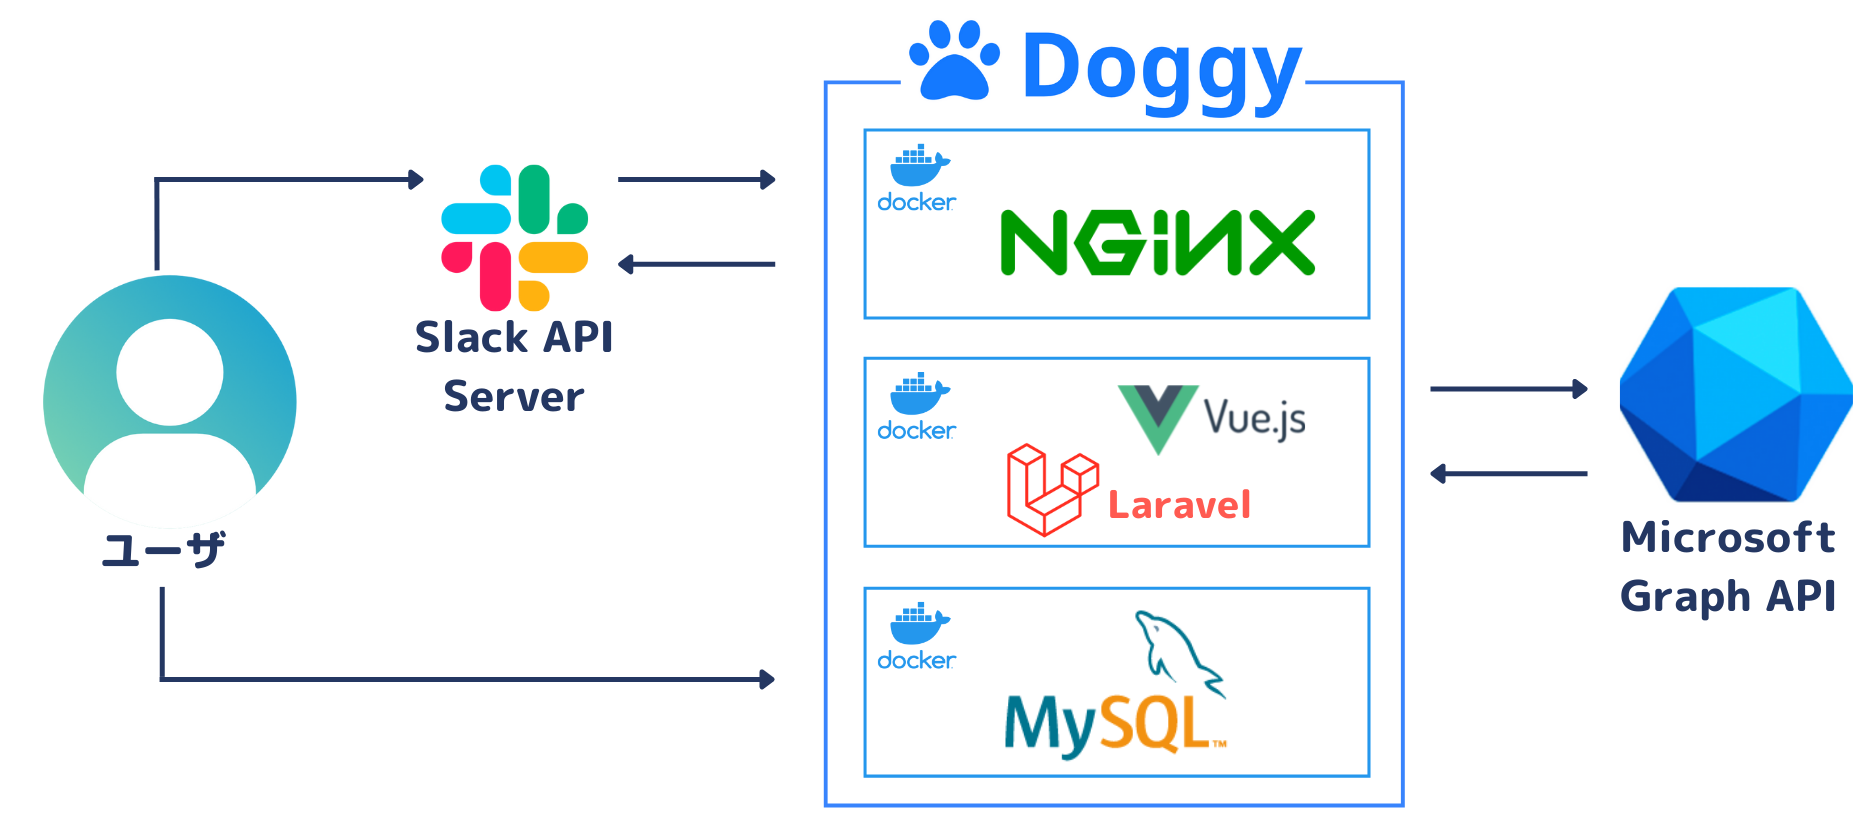 doggy system architecture